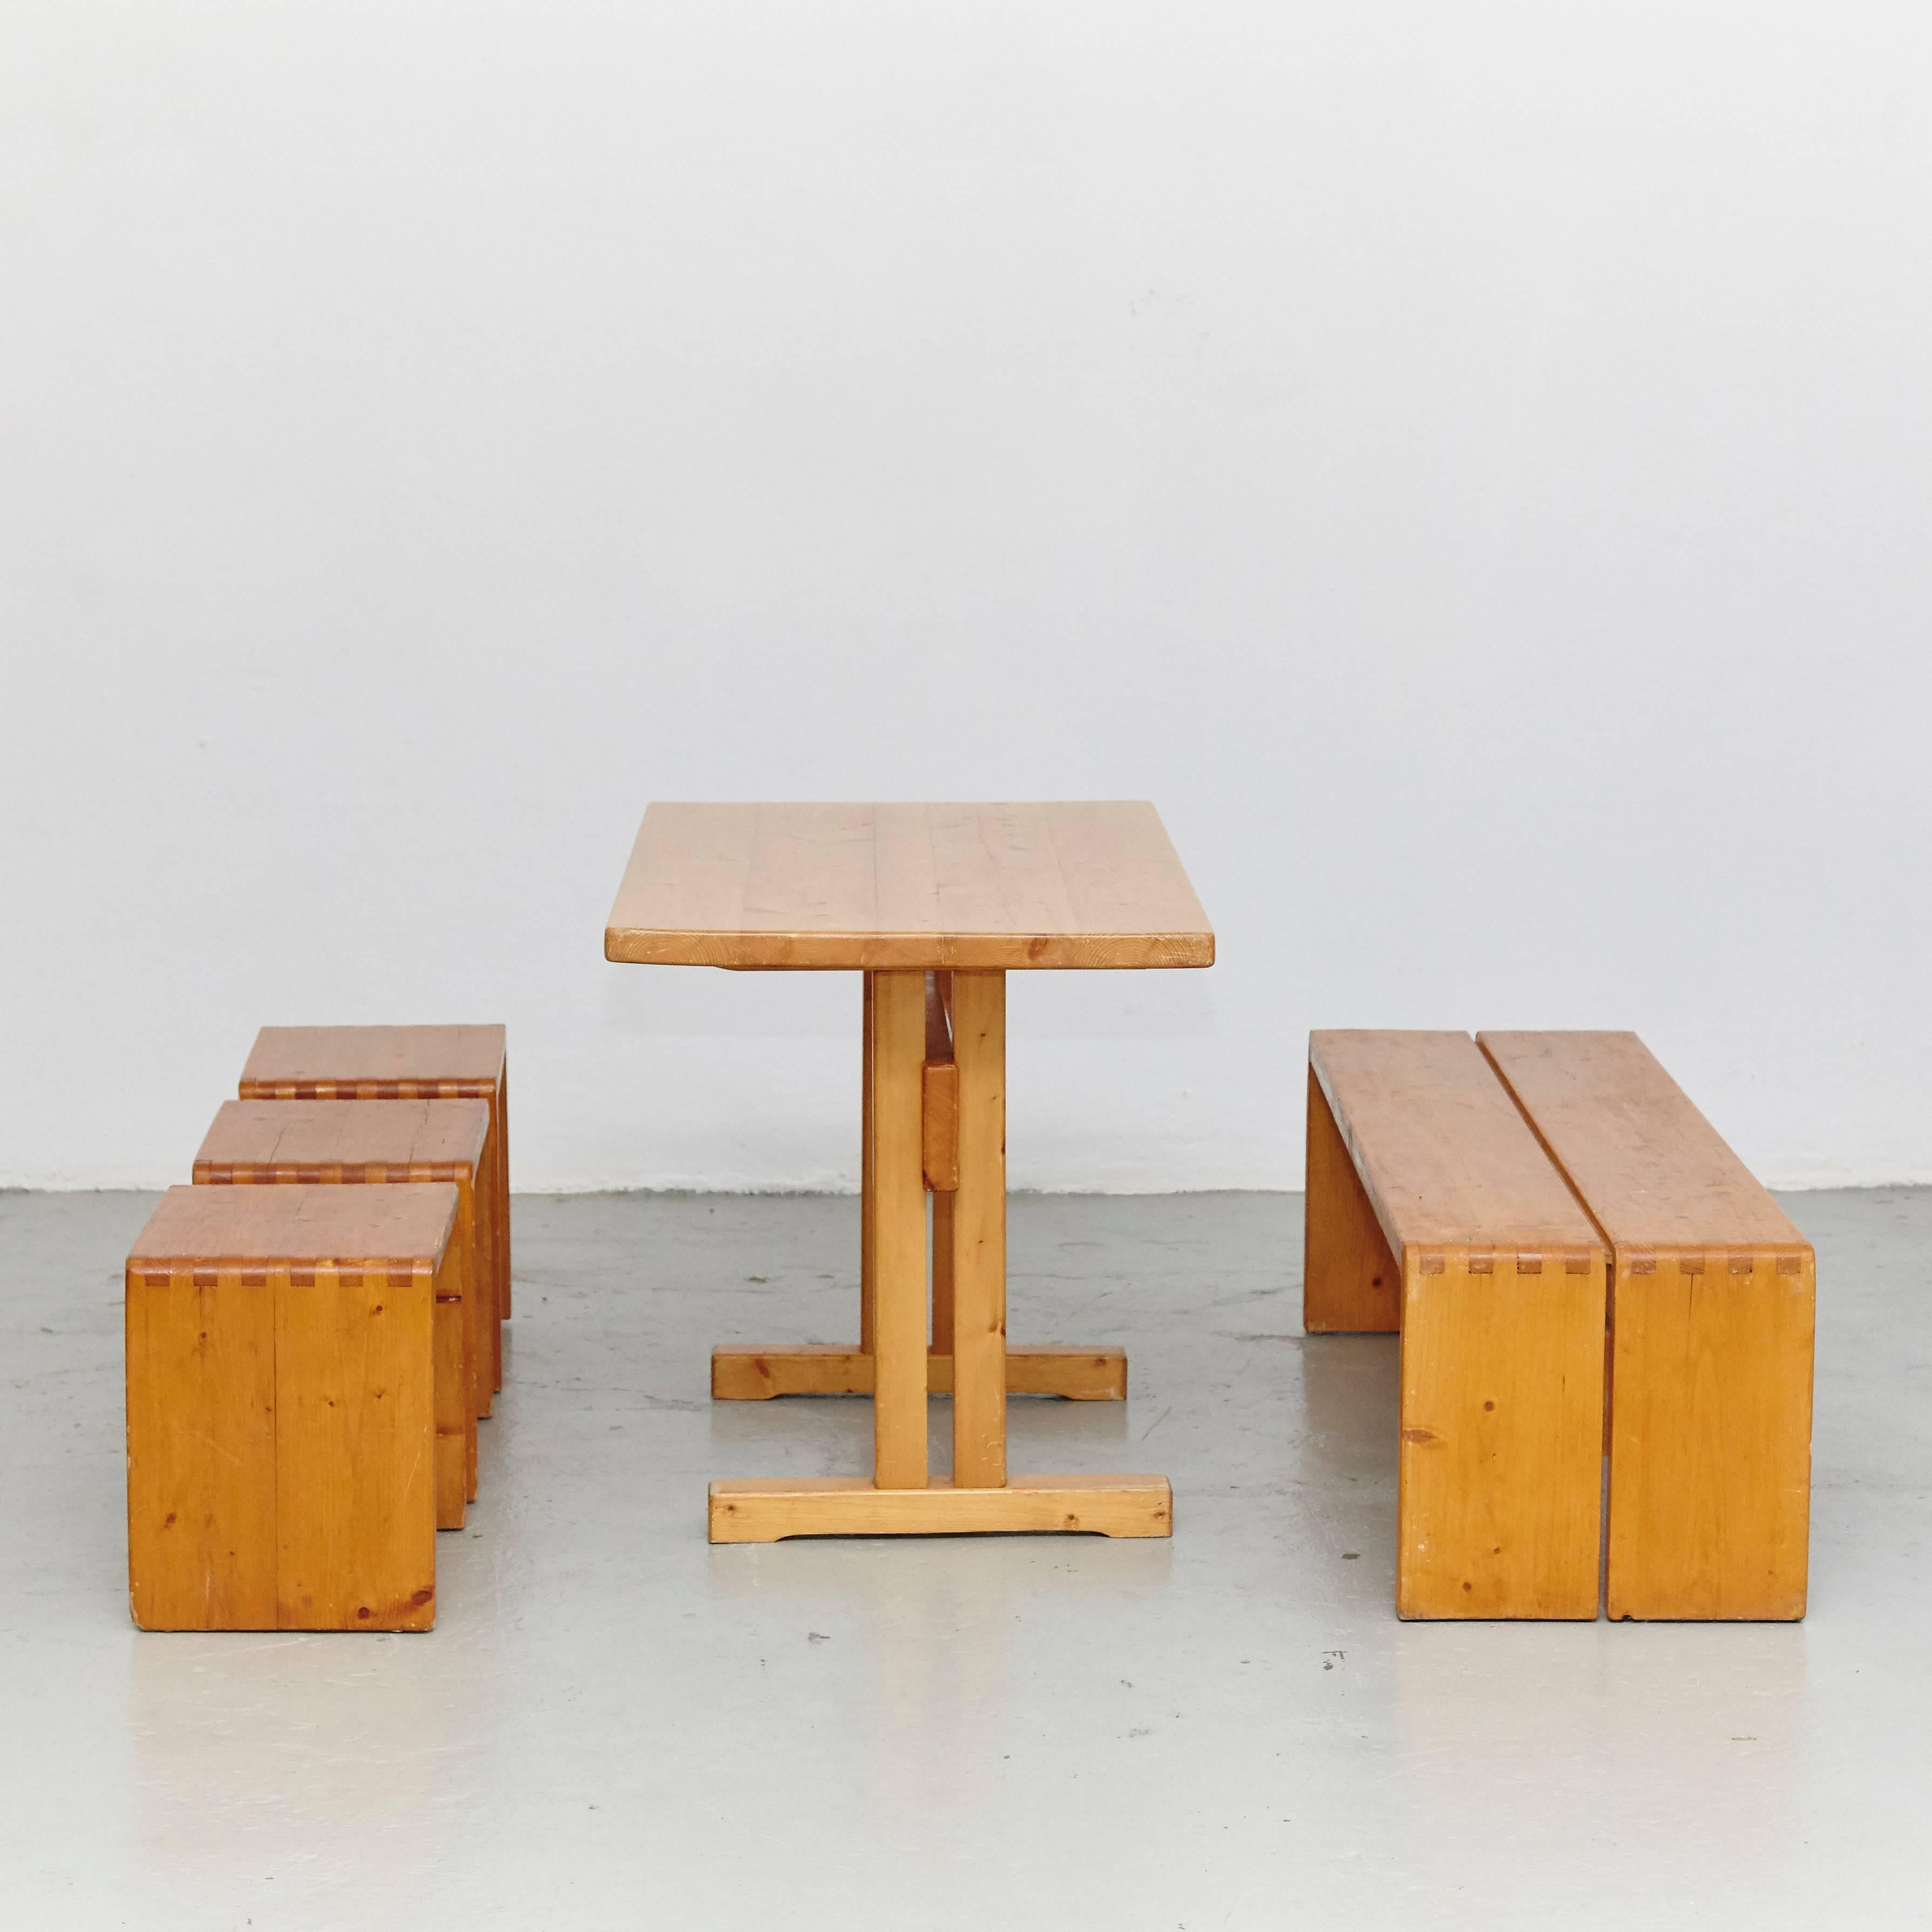 Set of table stools and benches designed by Charlotte Perriand for Les Arcs ski resort, circa 1960, manufactured in France.

Pinewood.

In good original condition, with minor wear consistent with age and use, preserving a beautiful patina.

The